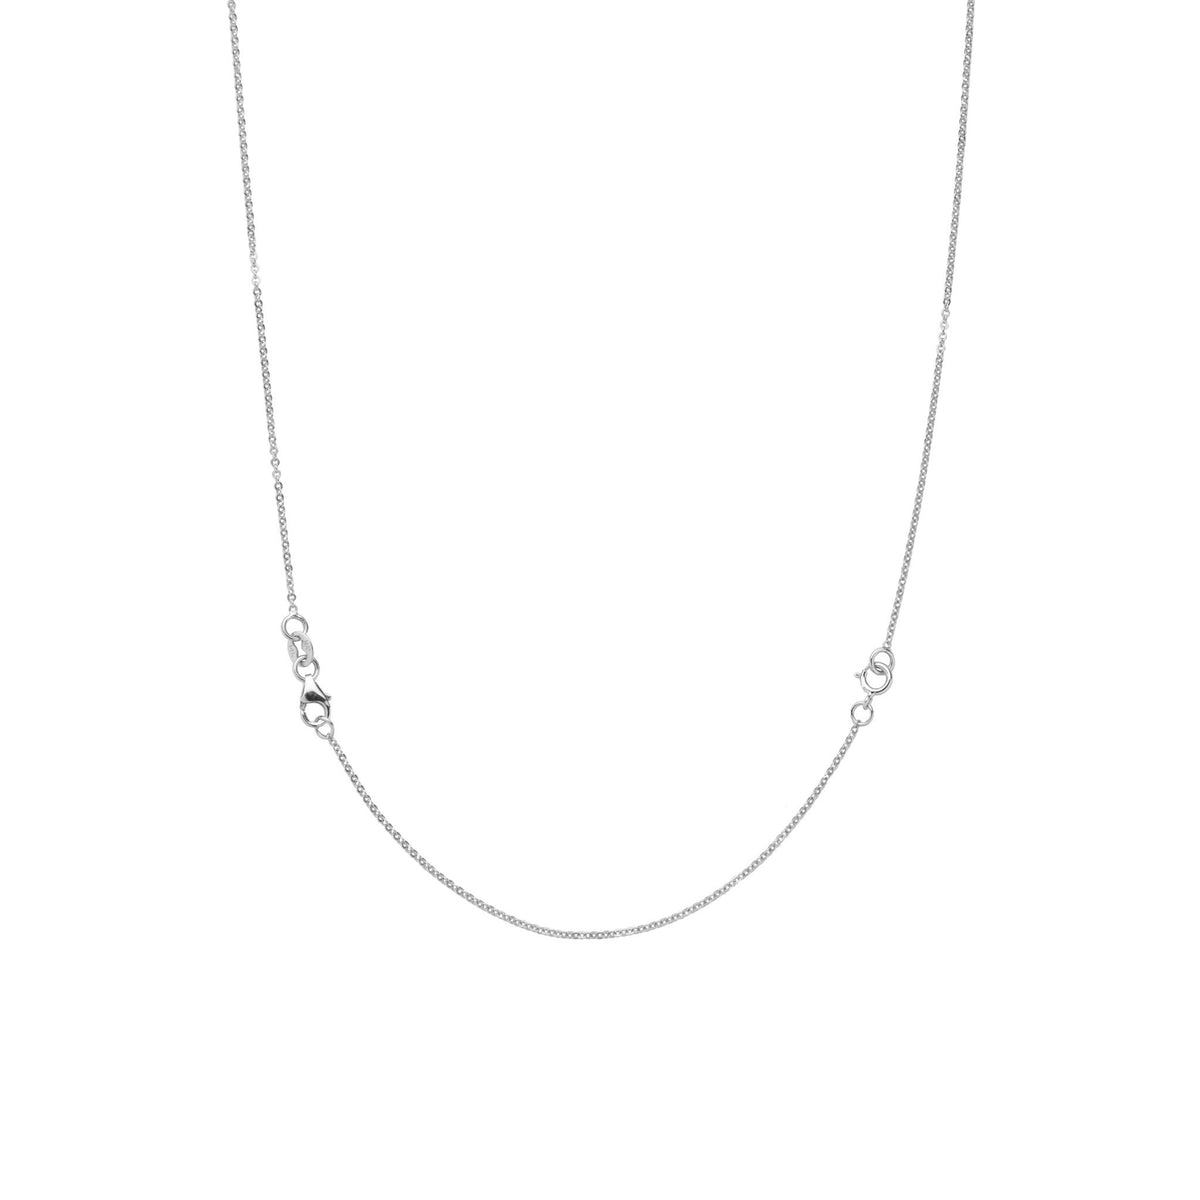 14k White Gold 3 Inch Chain Necklace Extender